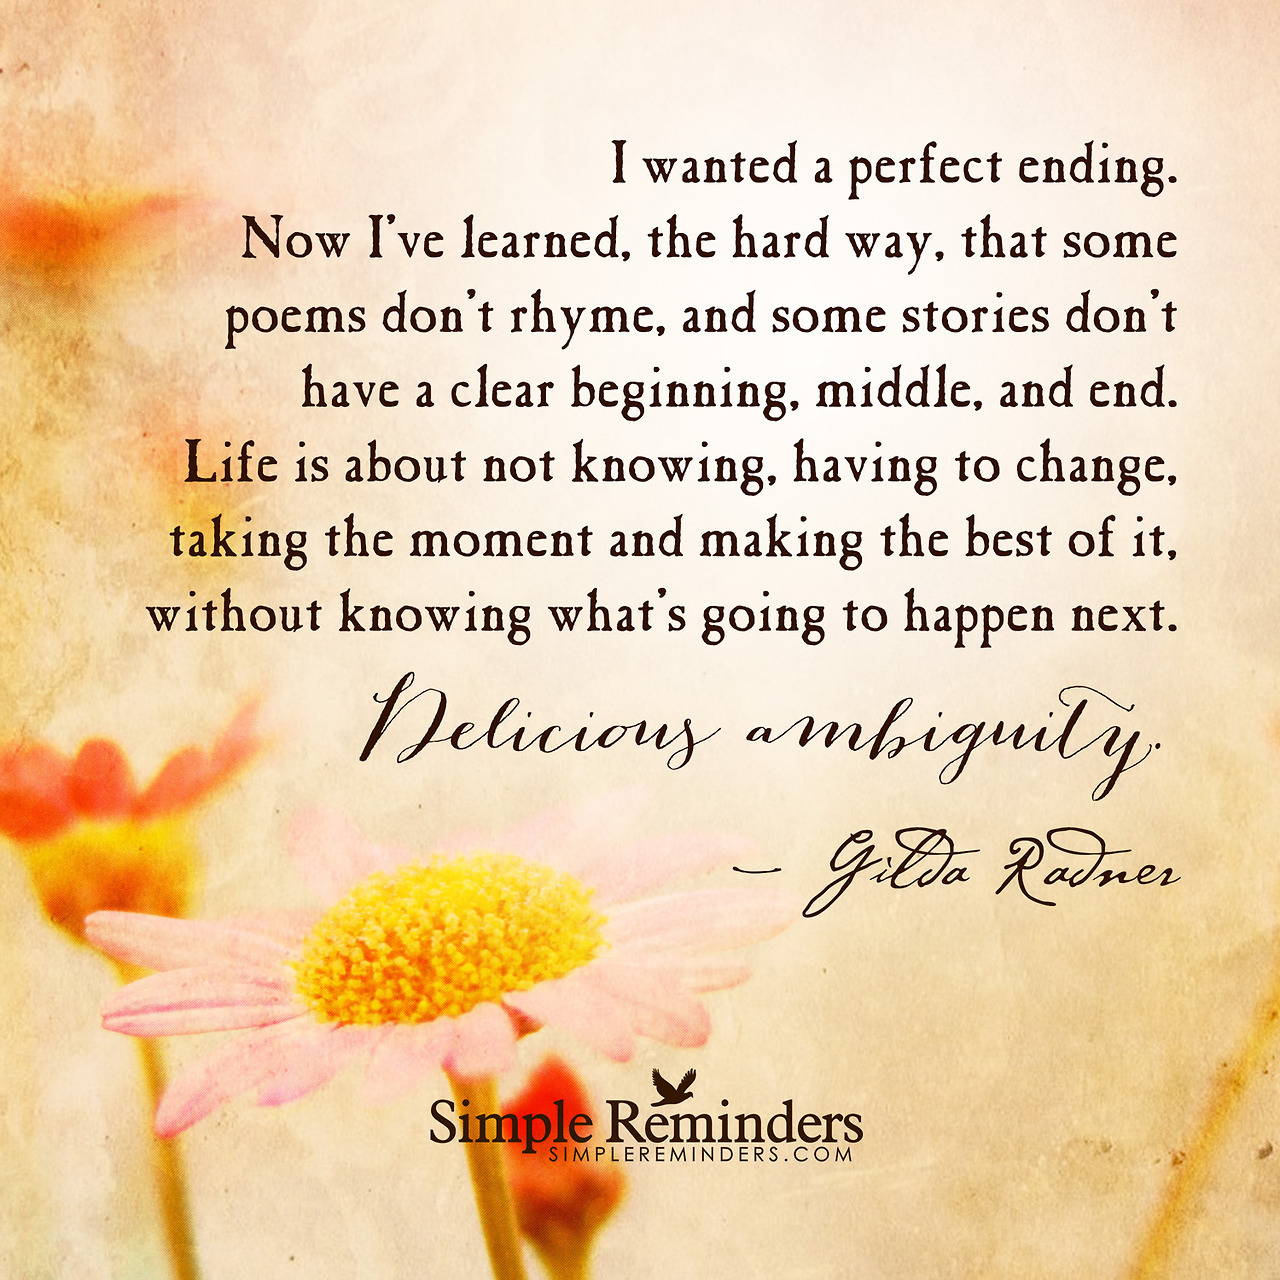 mysimplereminders:  “I wanted a perfect ending. Now I’ve learned, the hard way,